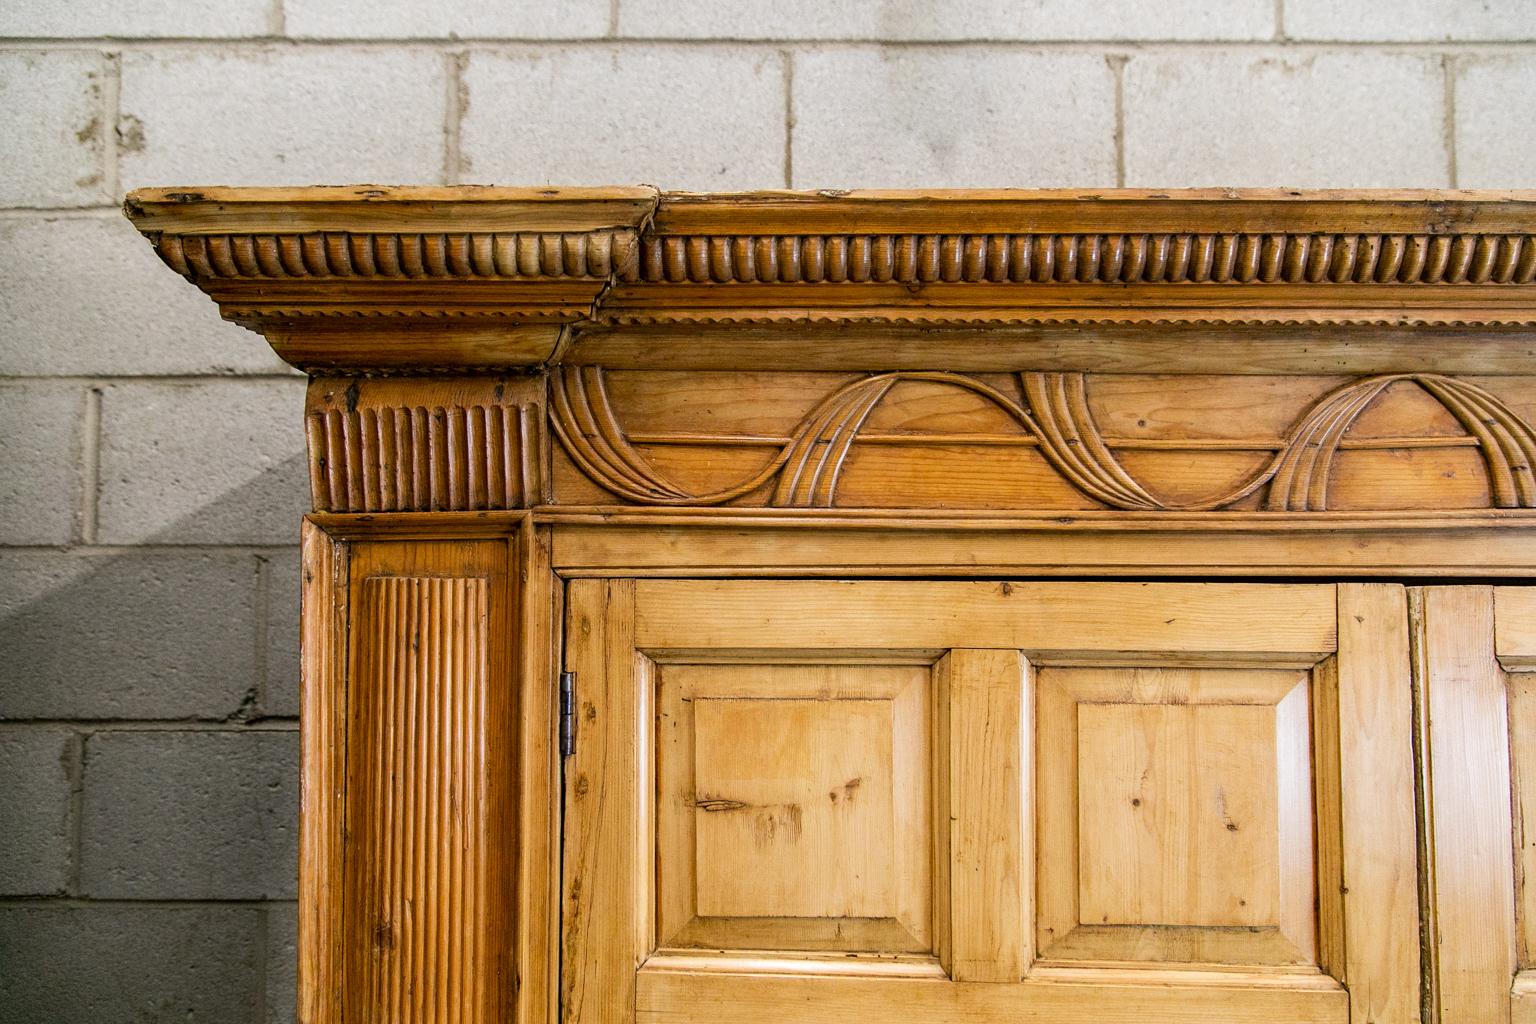 English pine cupboard, has a beautifully carved cornice with wave carving in the frieze. The fluted cornice molding has reeded pilasters and side panels.